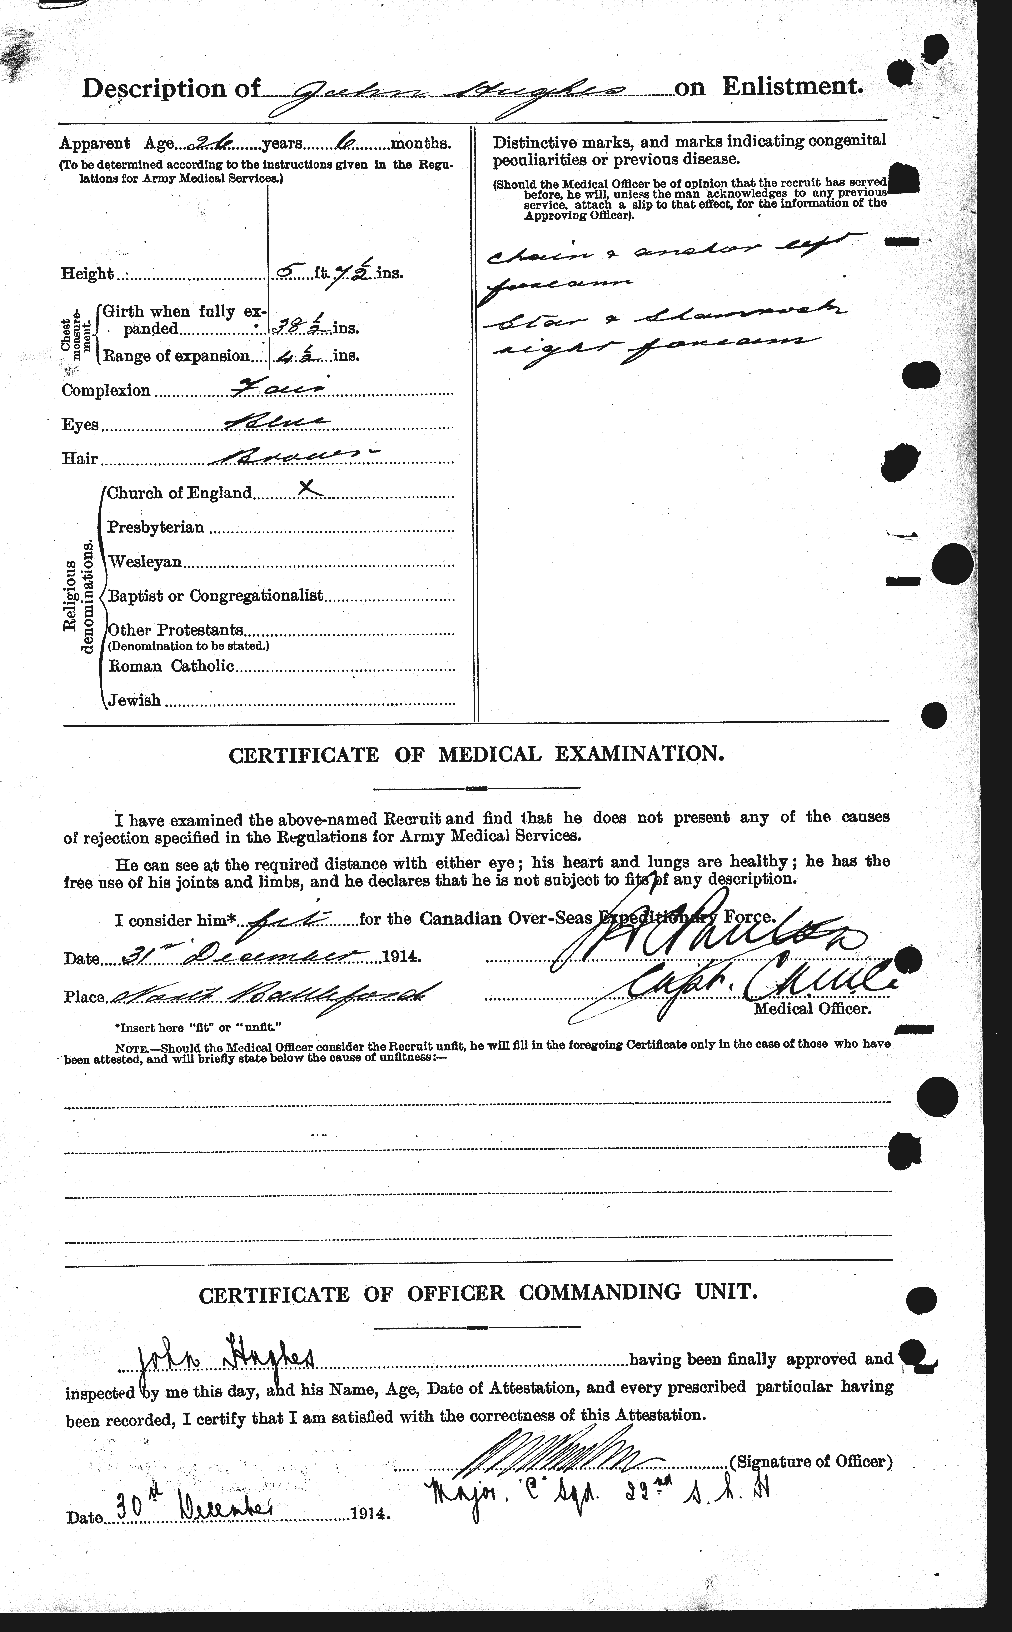 Personnel Records of the First World War - CEF 403987b